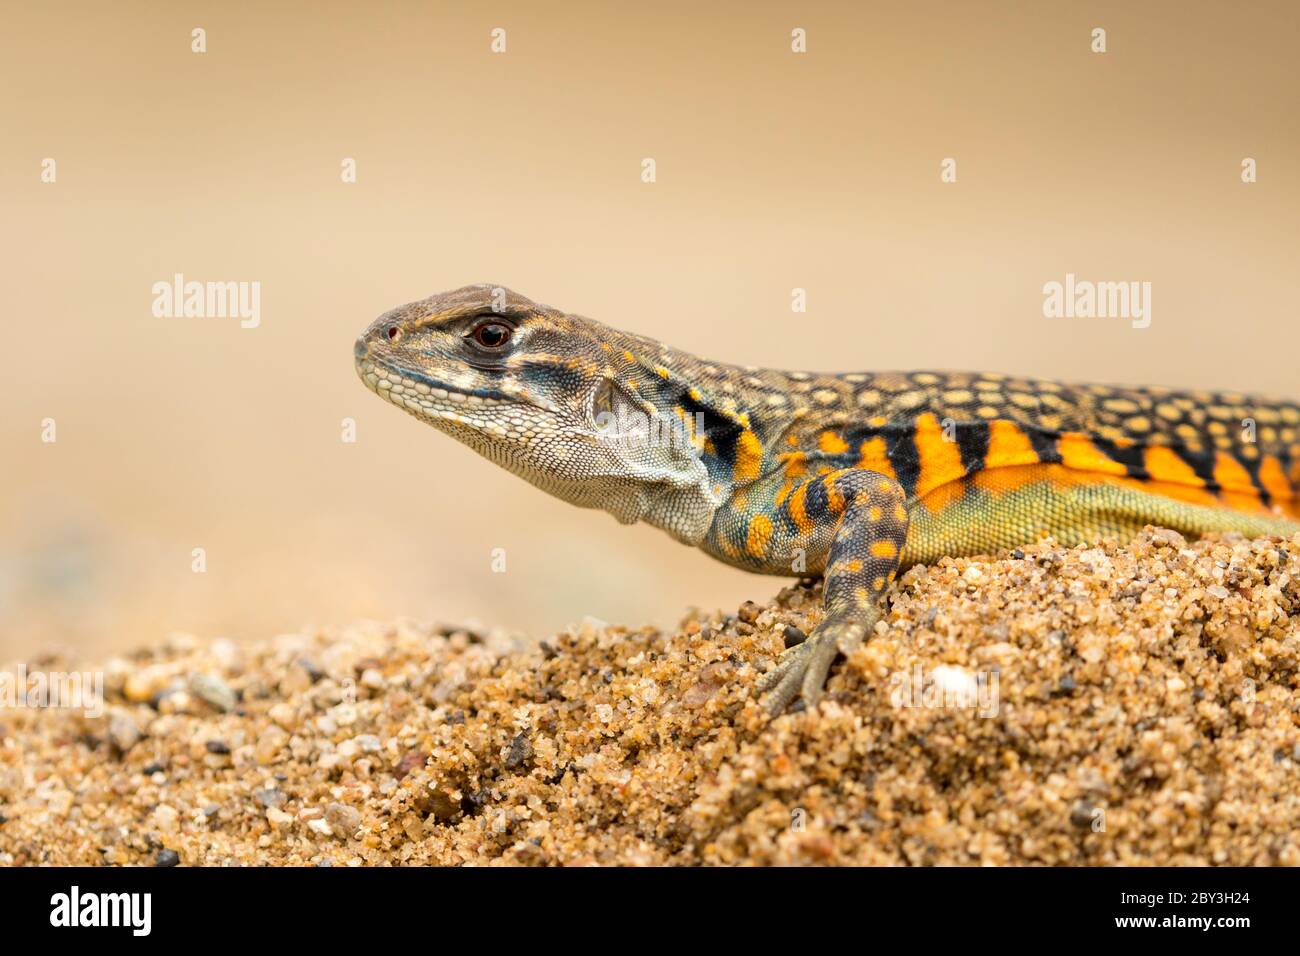 Image of Butterfly Agama Lizard (Leiolepis Cuvier) on the sand. Reptile Animal Stock Photo